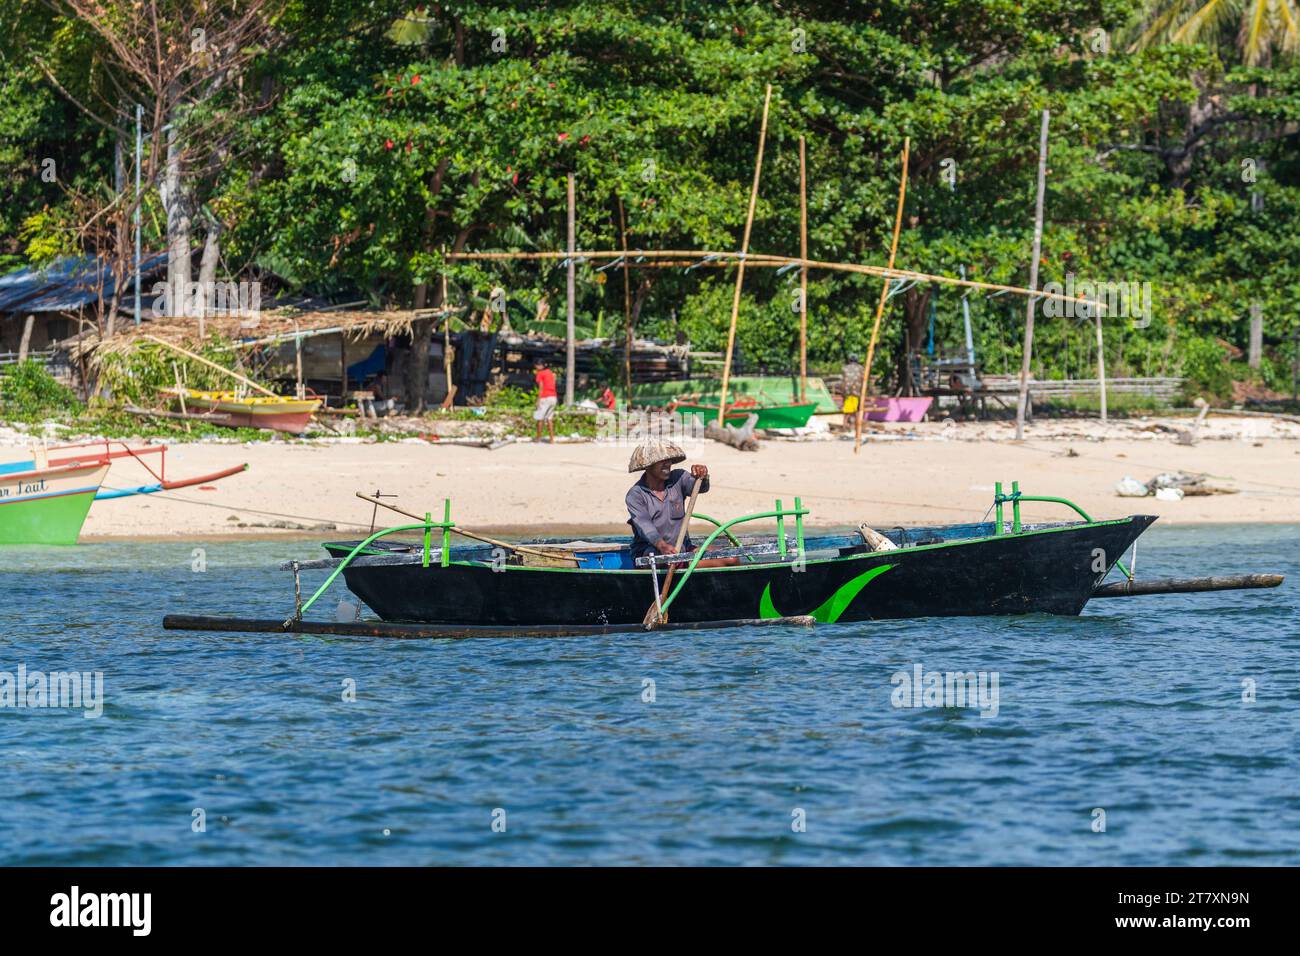 Local fisherman in outrigger boat in the shallow reefs off Bangka Island, off the northeastern tip of Sulawesi, Indonesia, Southeast Asia, Asia Stock Photo